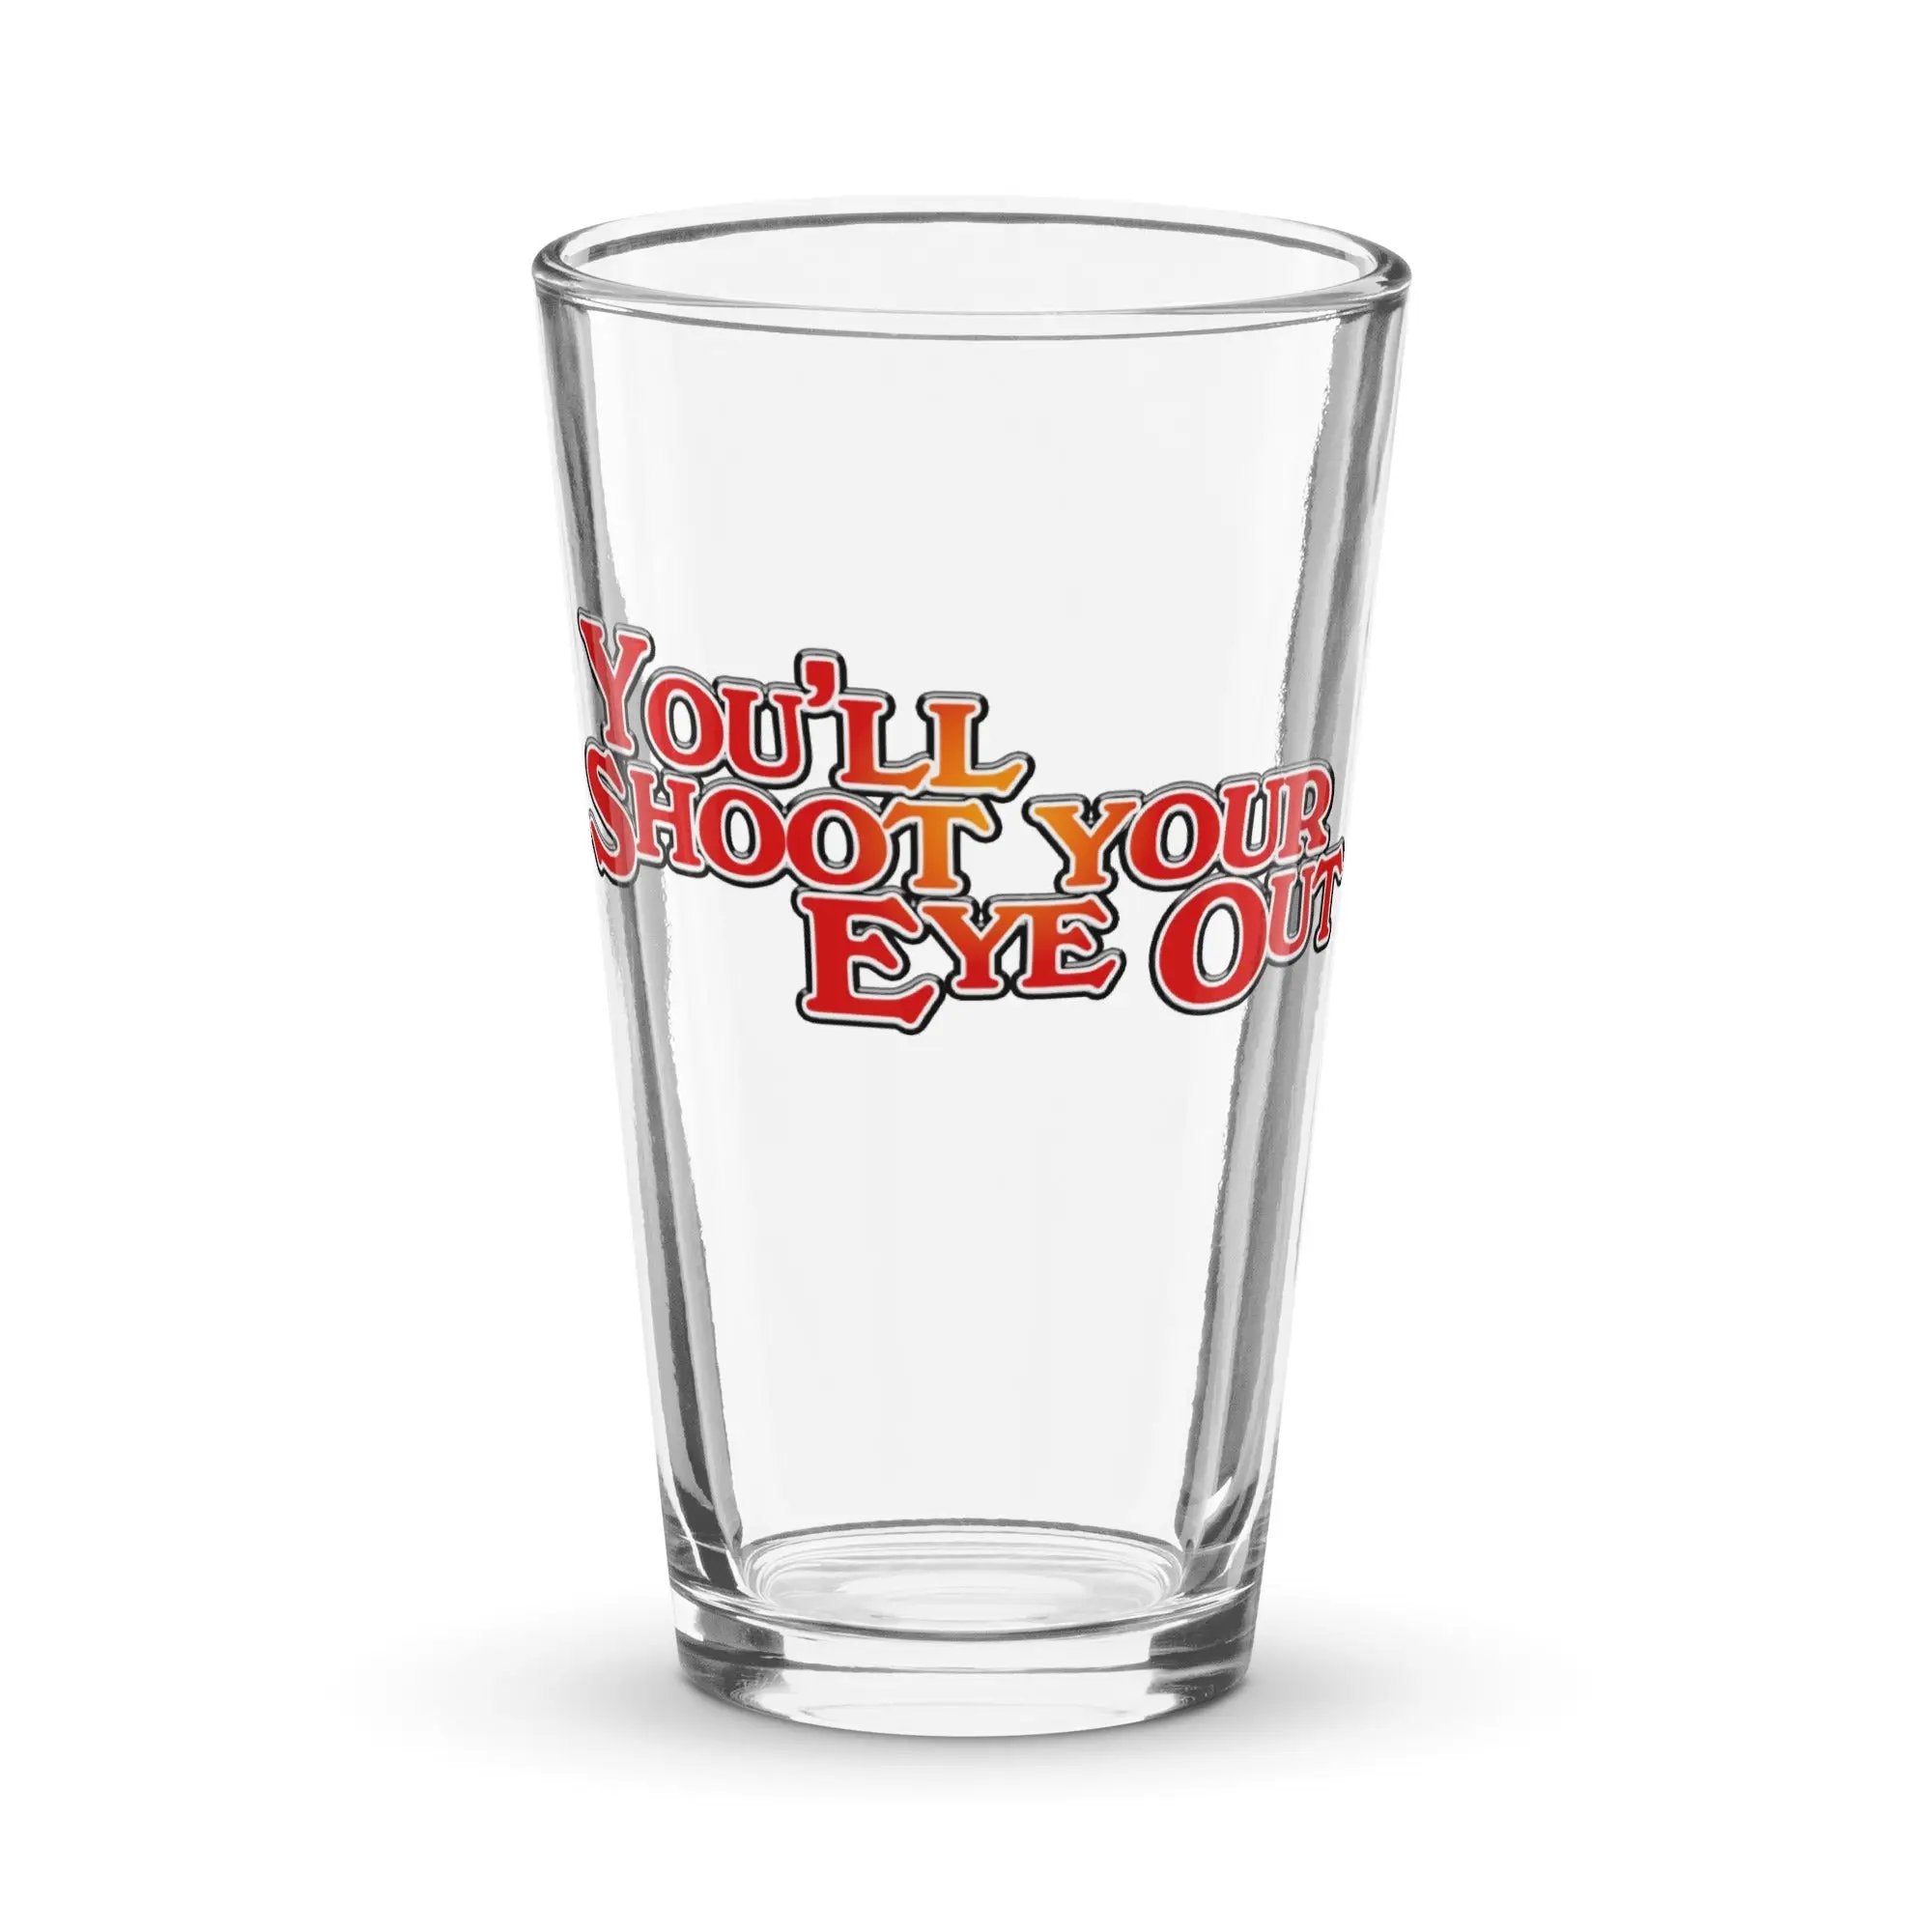 a shot glass with the words you'll shoot your exo on it